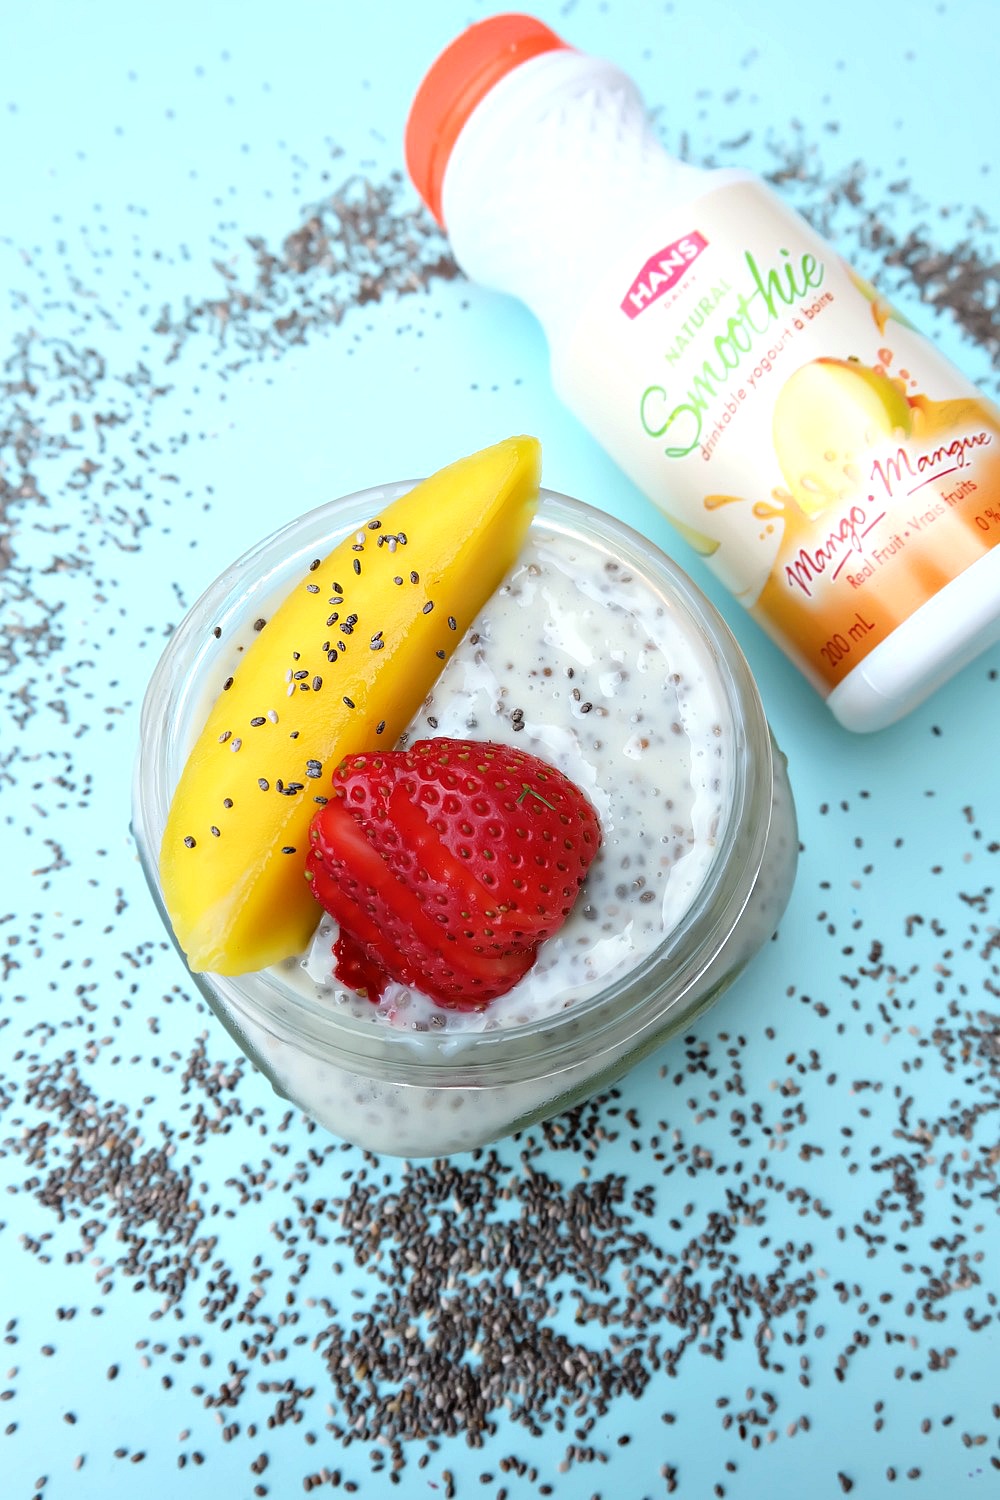 Breakfast is ready with only 30 seconds of prep work with this delicious and nutritious, protein packed breakfast idea! Kids can help make this 30 second prep easy chia pudding recipe in flavors like mango, strawberry, blueberry, passionfruit and peach! #HansDairy #sponsored